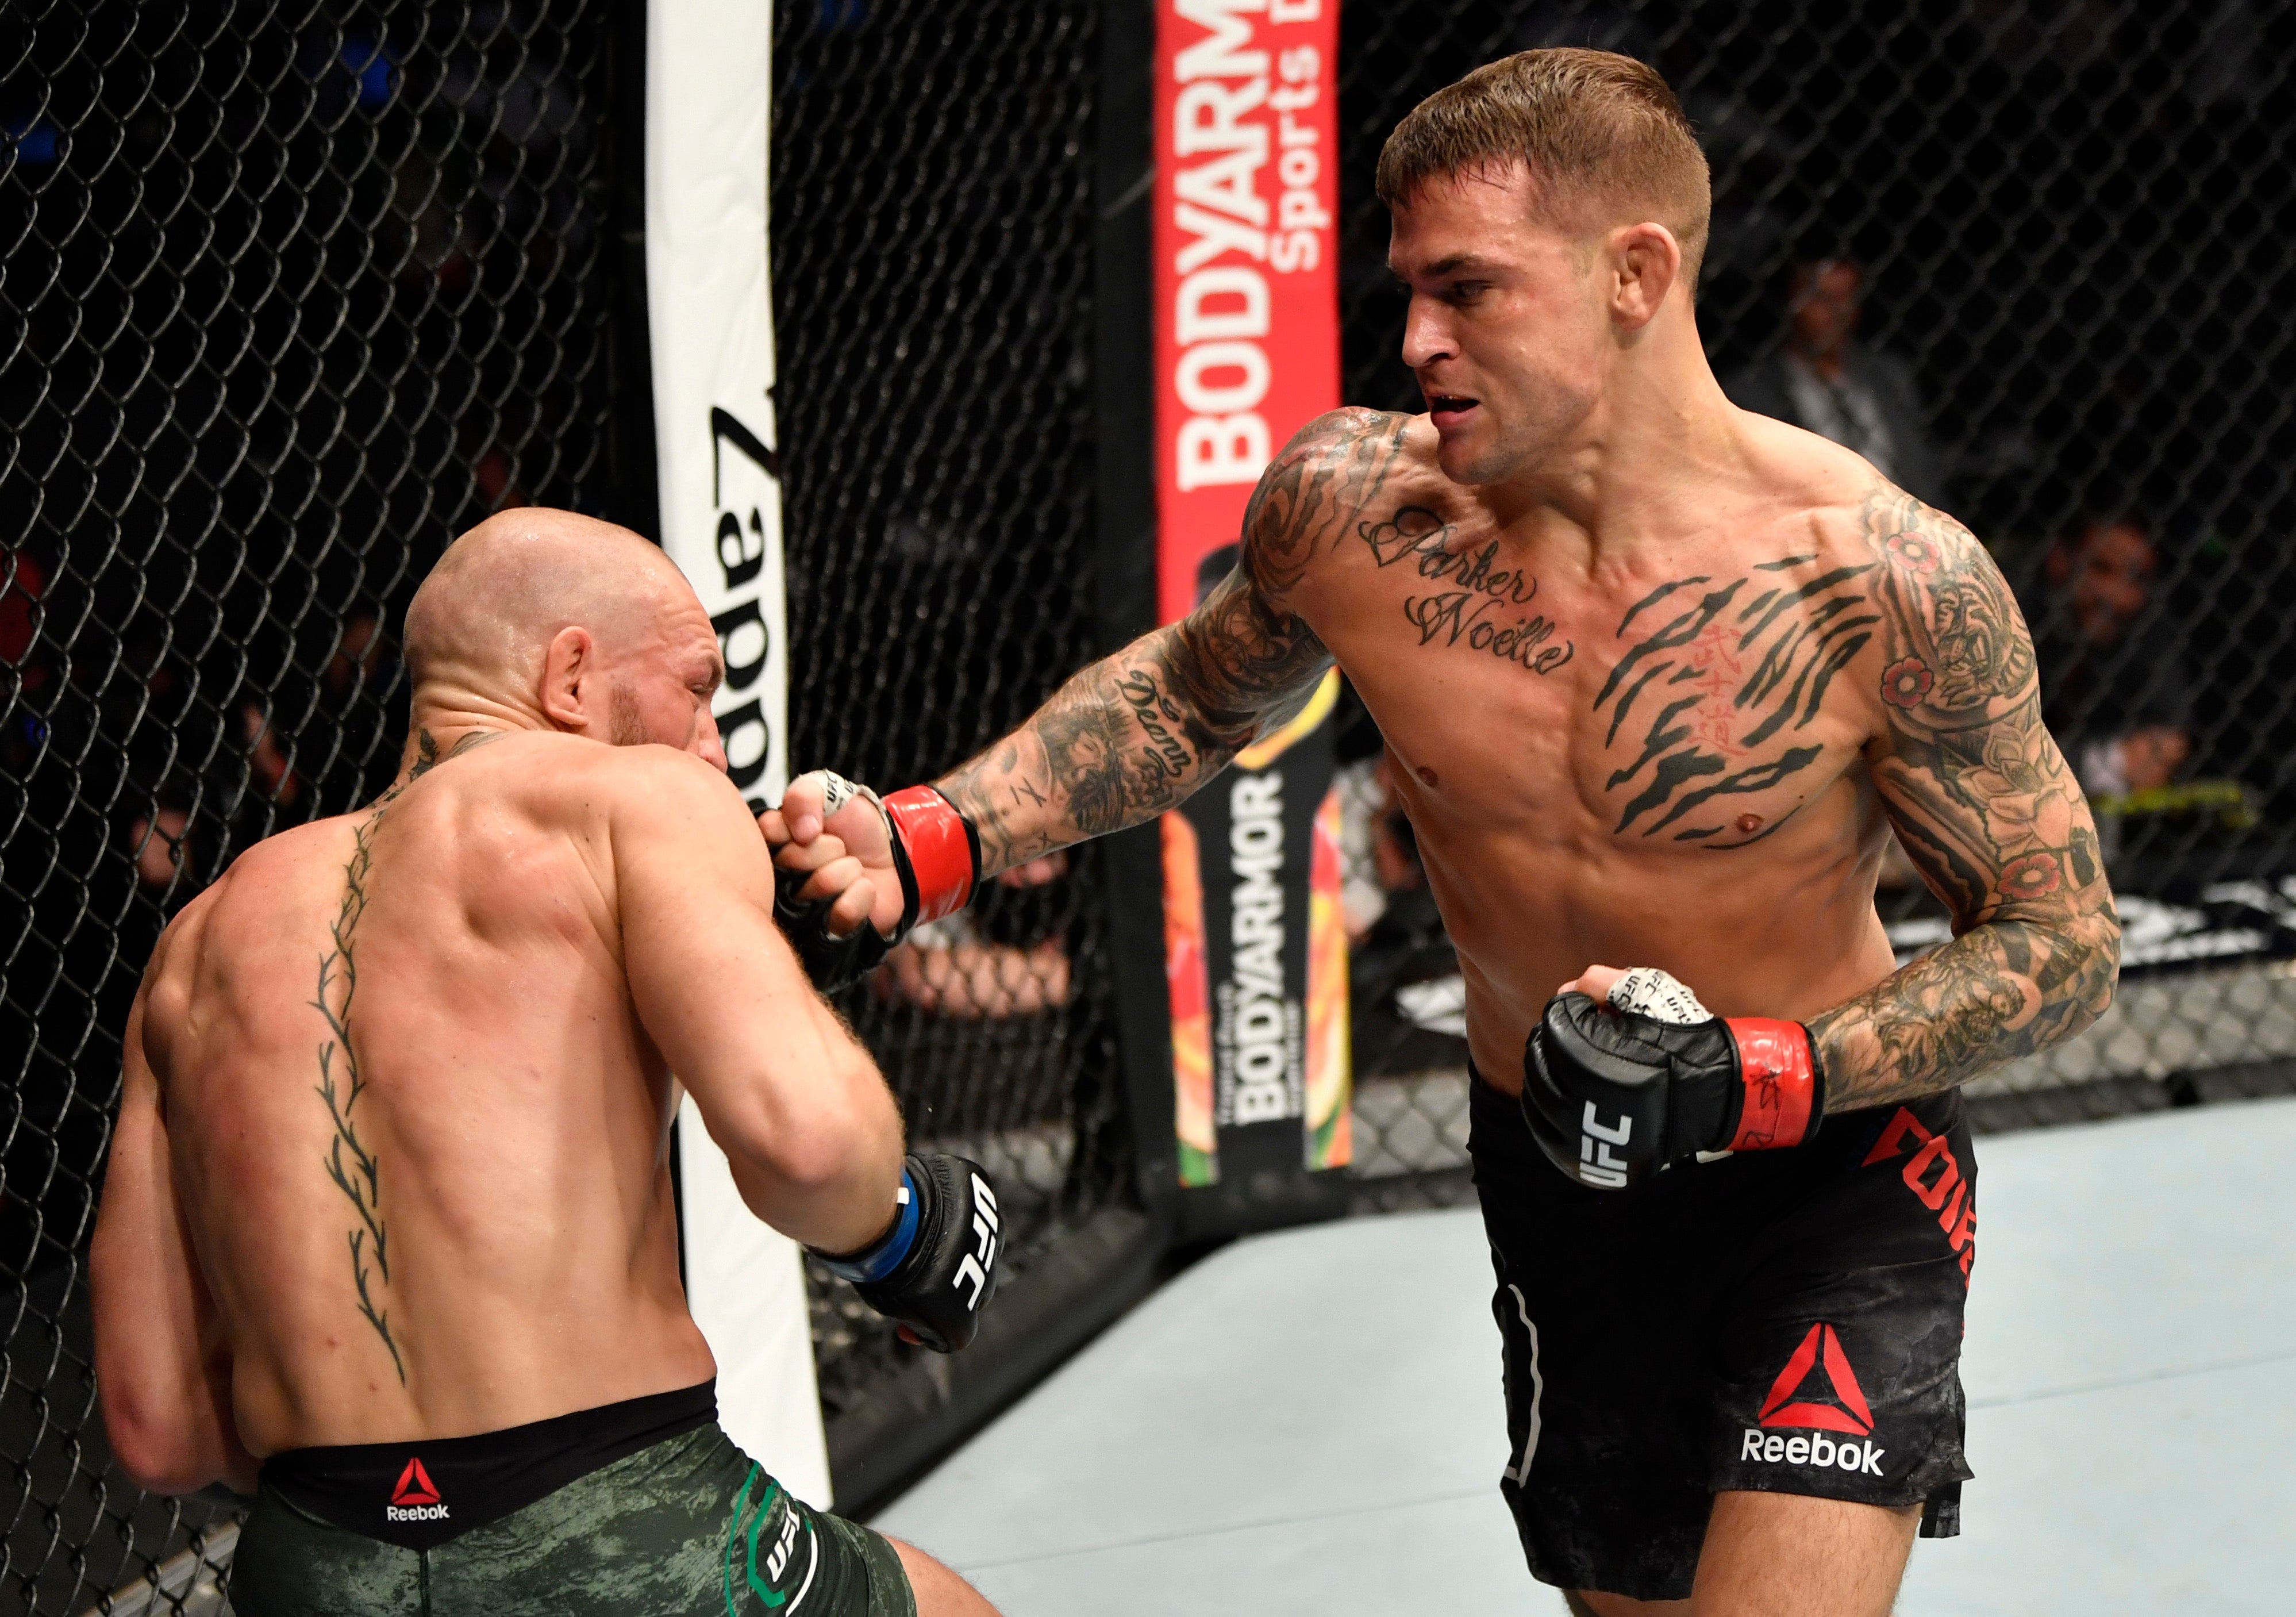 Conor McGregor, left, moments before losing to Dustin Poirier